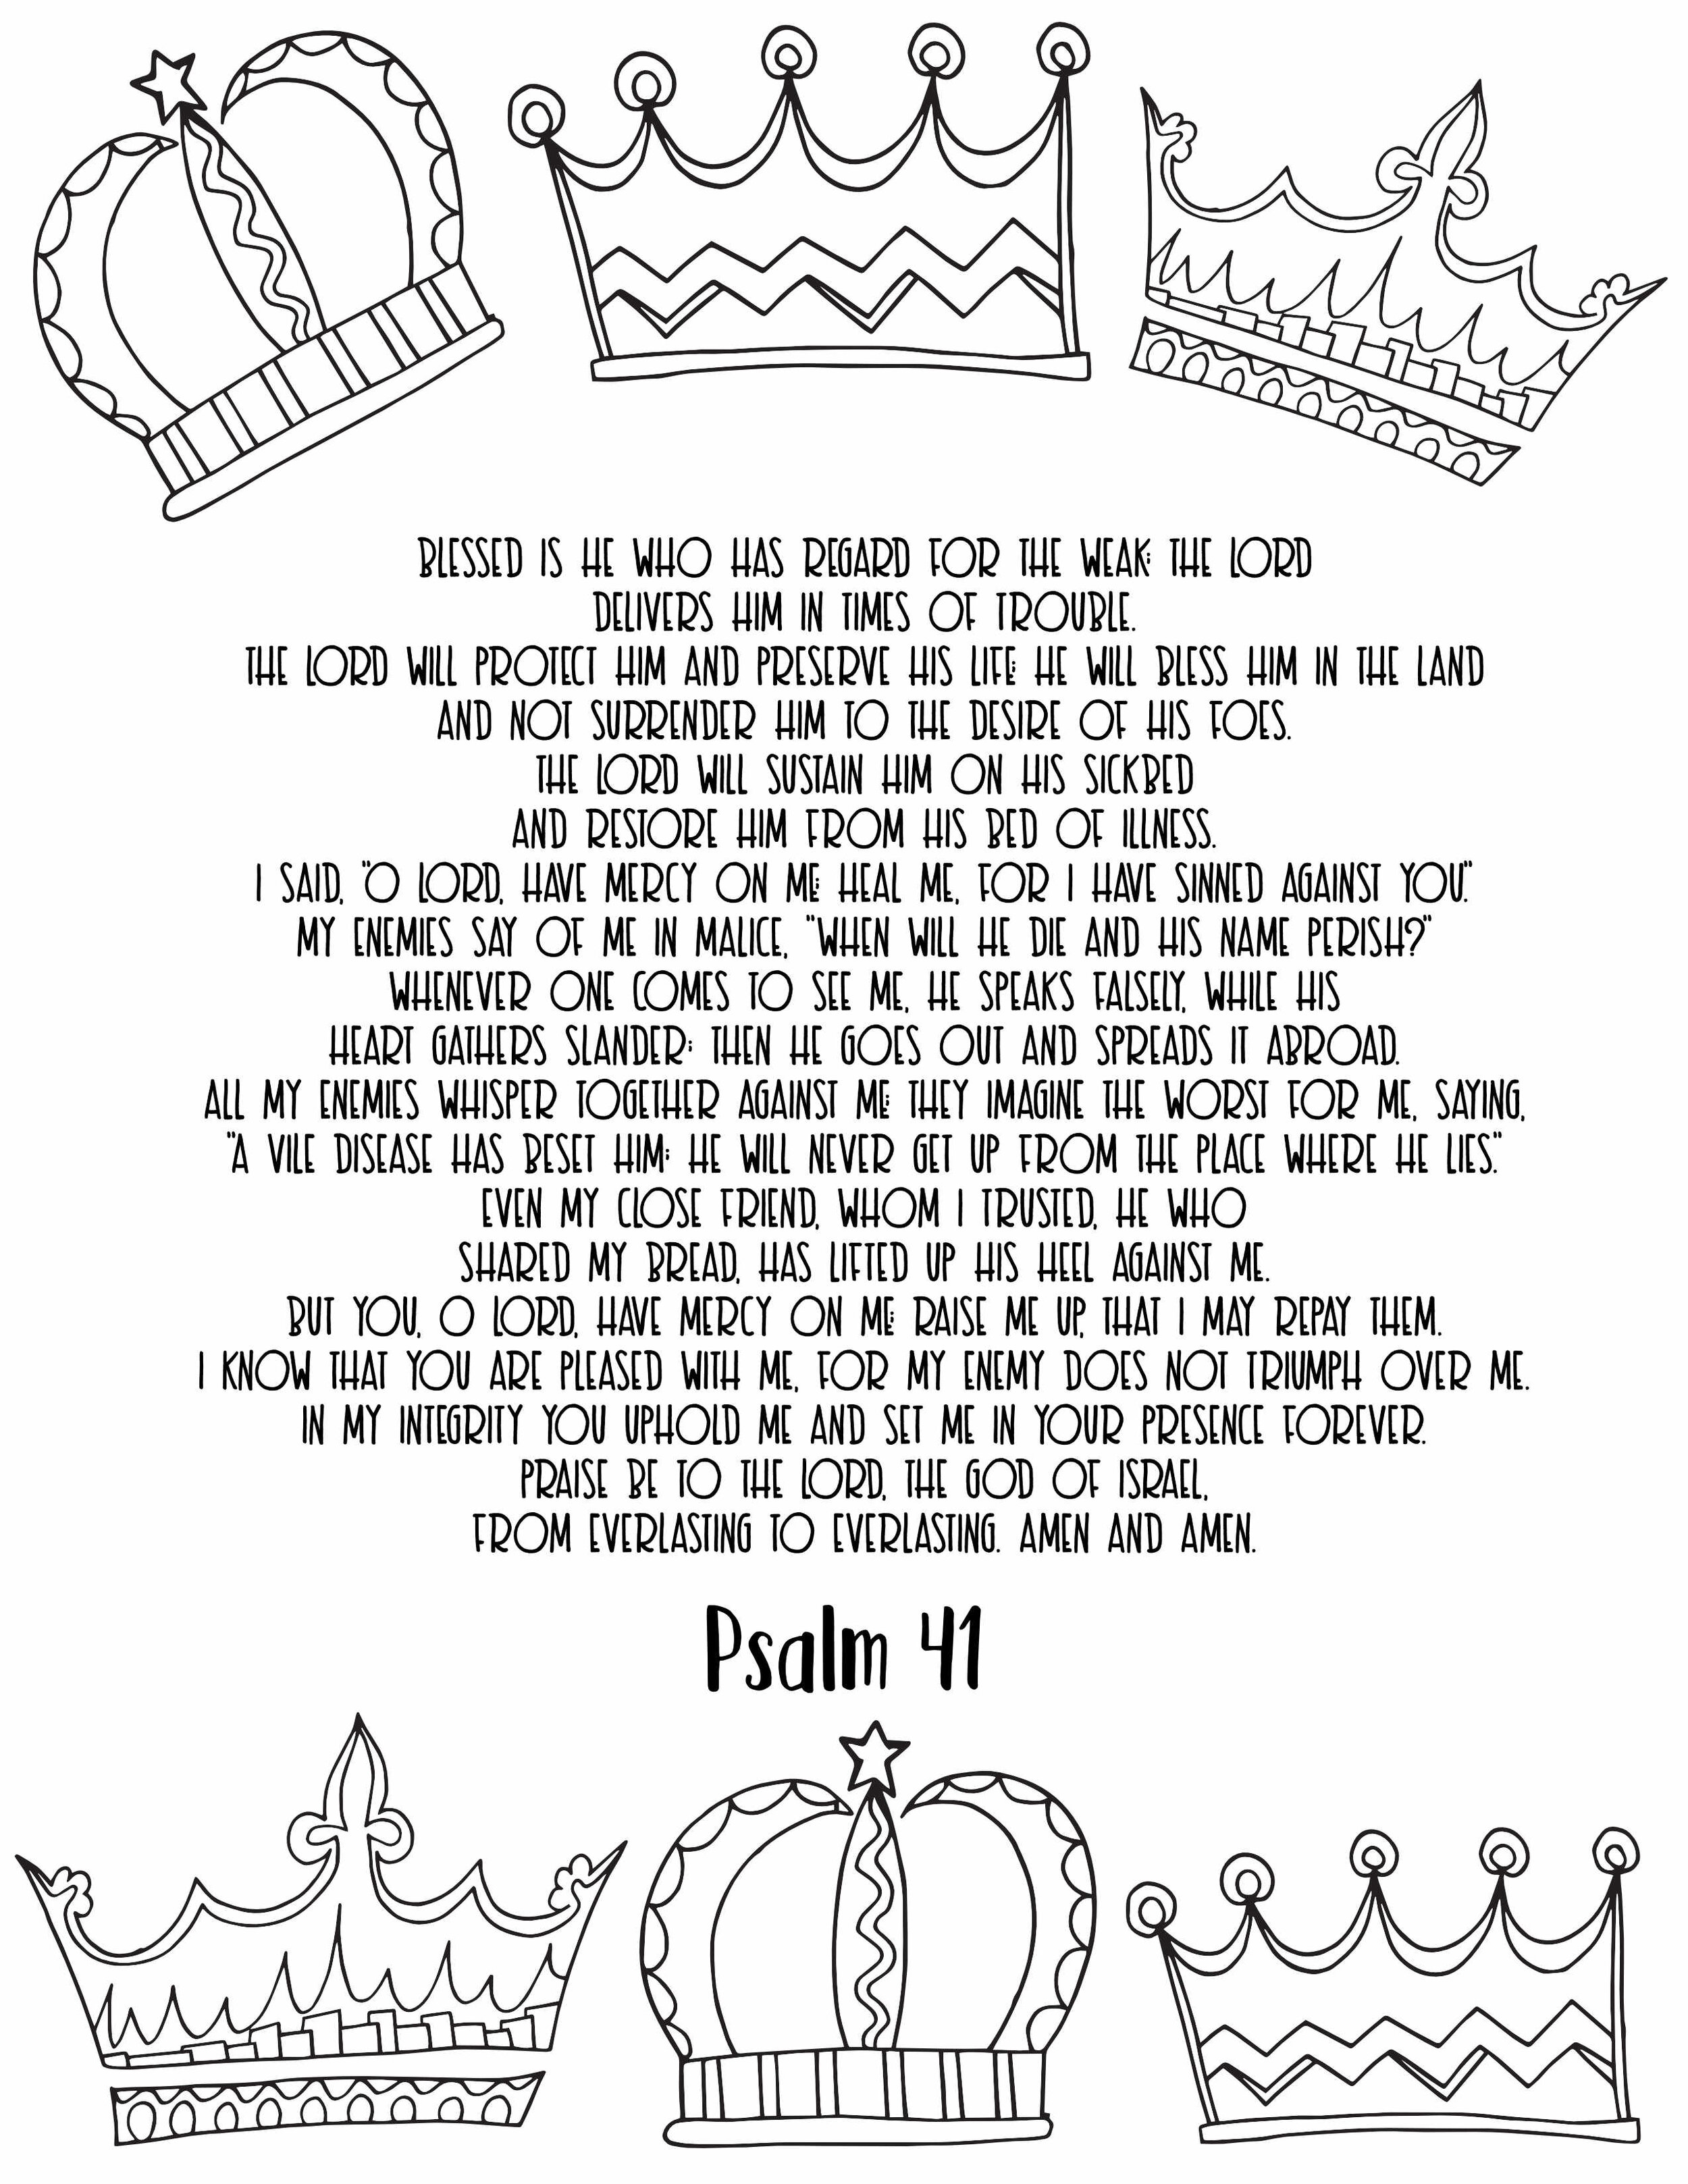 10 Free Printable Psalm Coloring Pages - Download and Color Adult Scripture - Psalm 41CLICK HERE TO DOWNLOAD THIS PAGE FREE